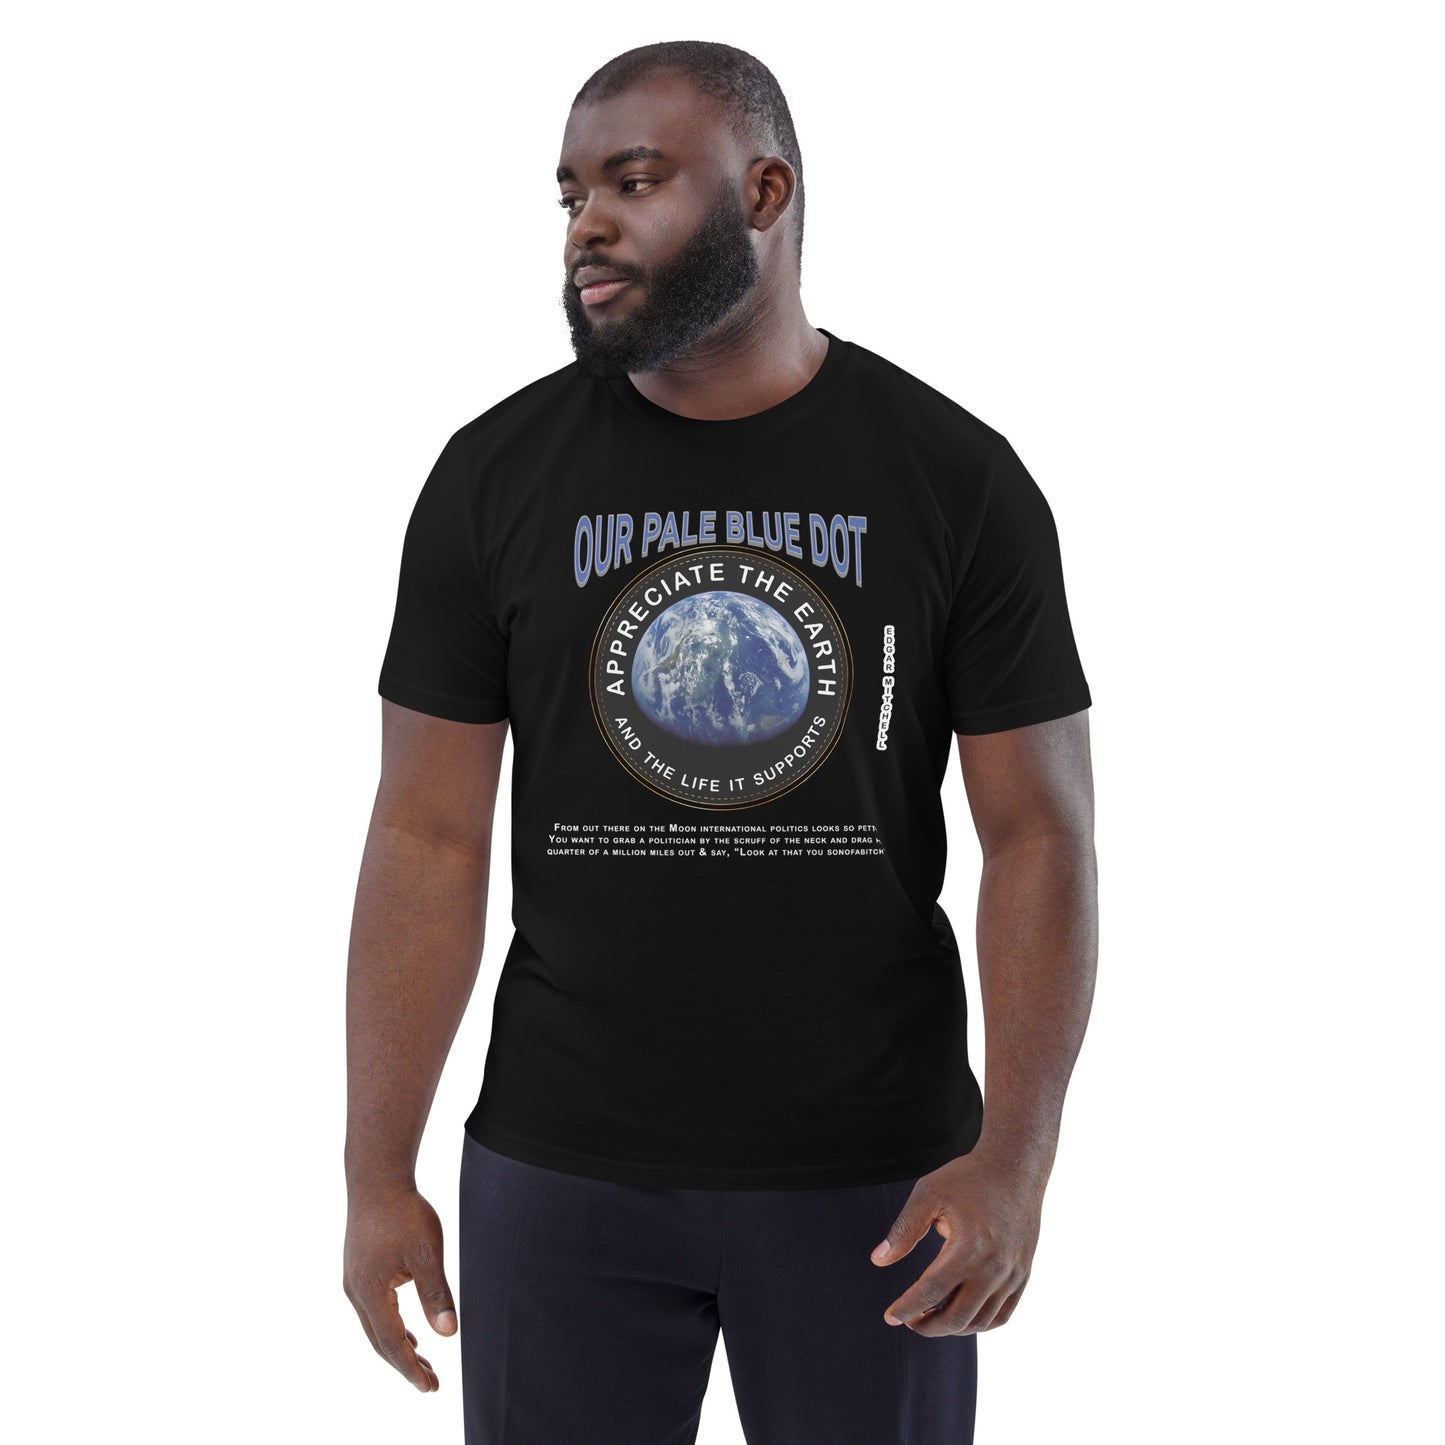 Unisex organic cotton t-shirt -Appreciate The Earth (Edgar Mitchell) & The Life It Supports